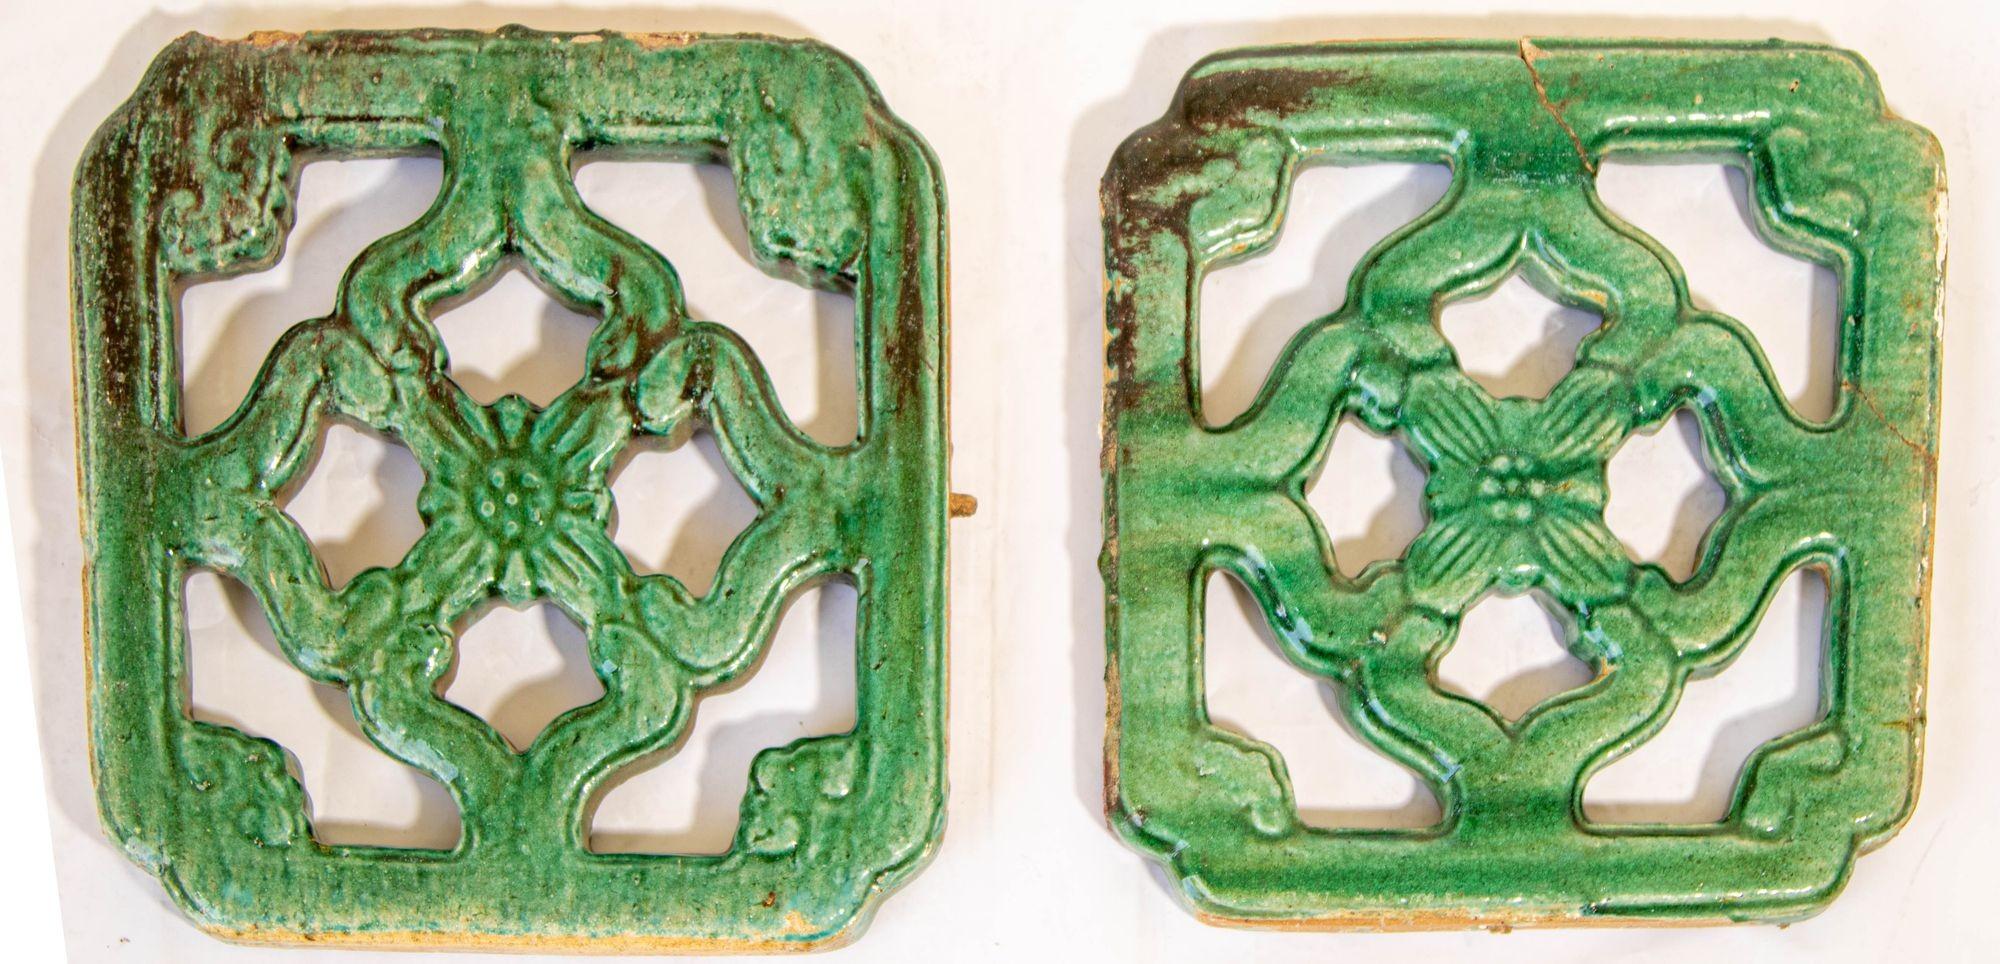 Antique Chinese emerald Green Glazed Breezeway Tile, circa 1900 Set of 2.
Early 20th century Chinese jade, emerald green ceramic garden tiles - Set of 2.
Antique green glazed heavy ceramic tiles, openwork decoration with flower at center,